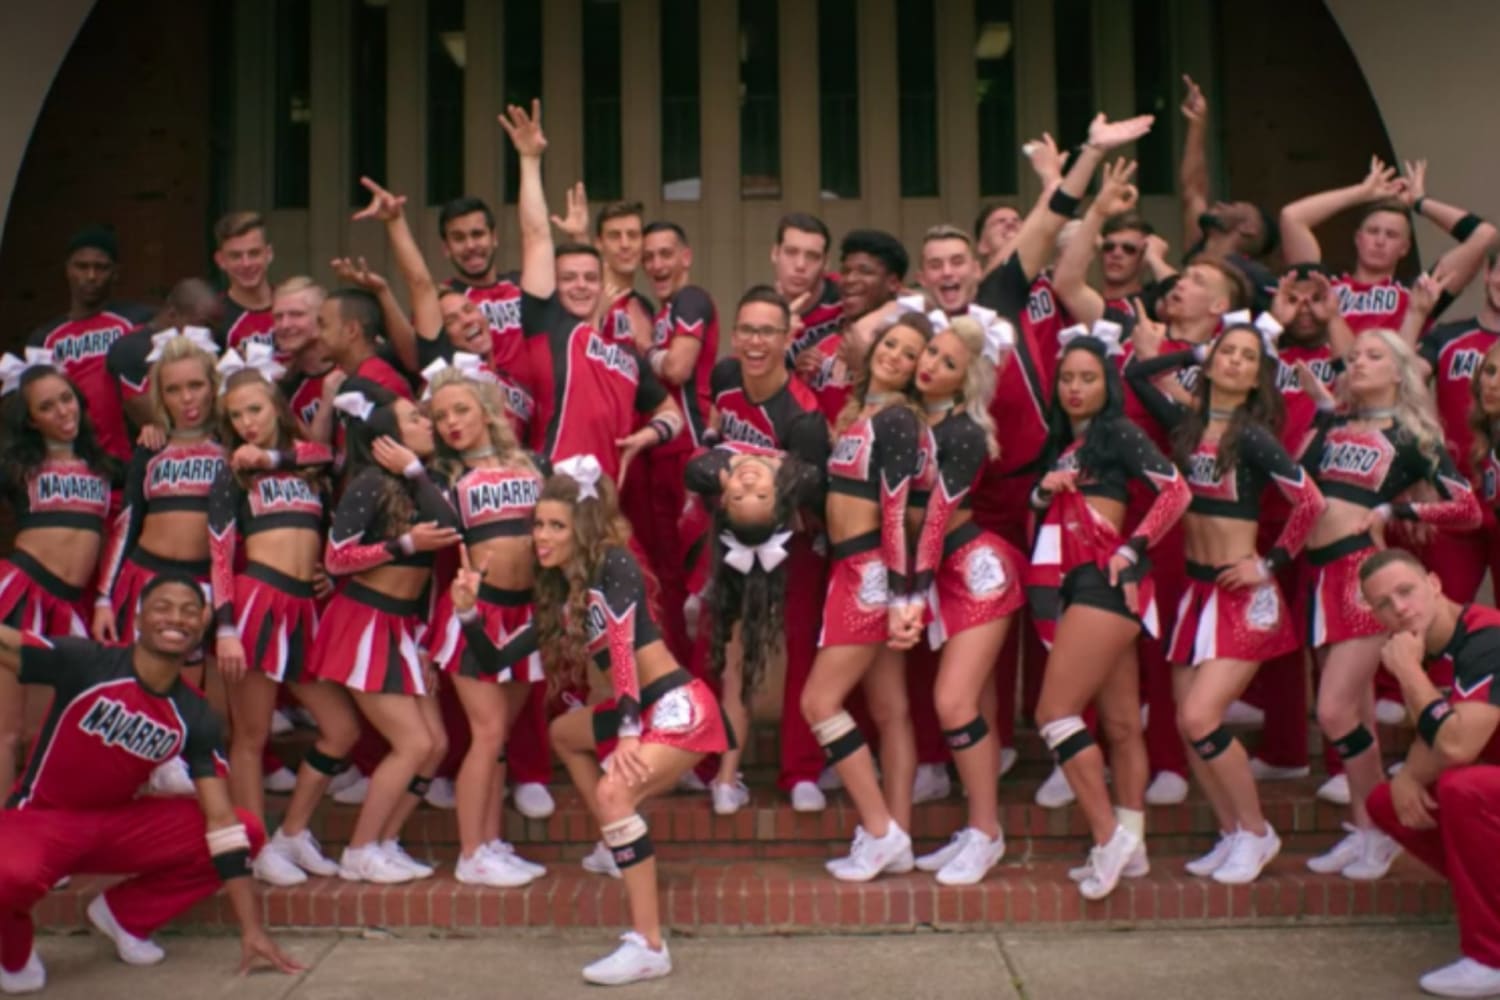 9 Amazing life lessons you can learn from Netflix's Cheer